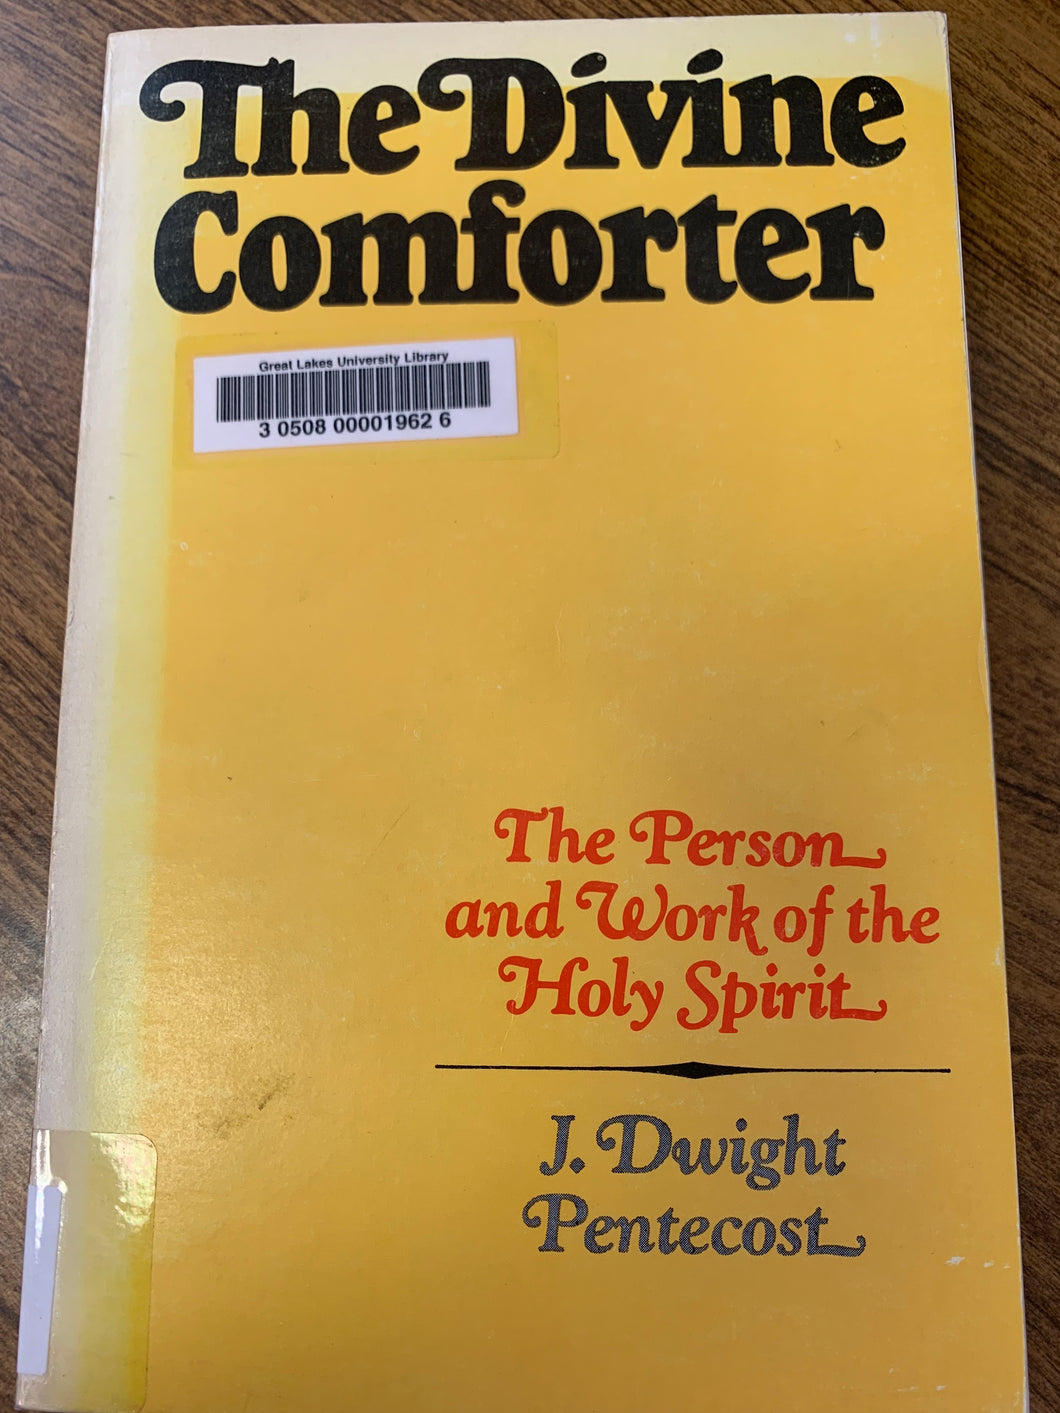 The Divine Comforter: The Person and Work of the Holy Spirit by J. Dwight Pentecost